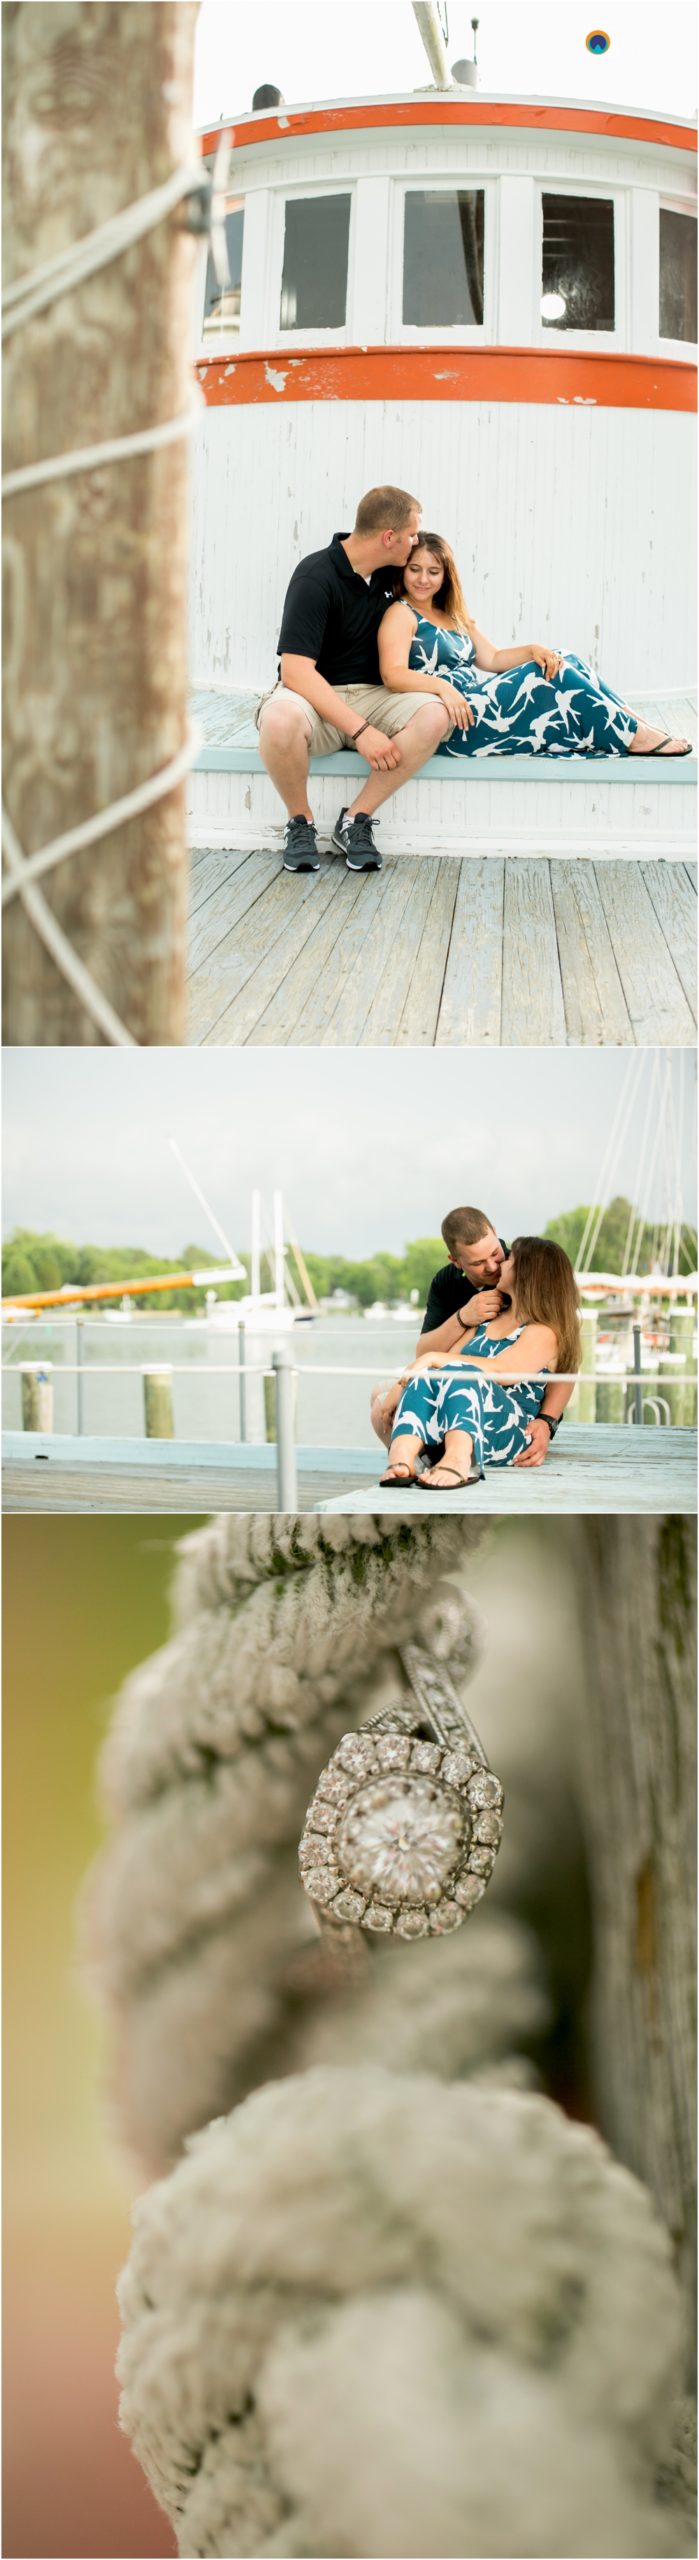 St.-Michaels-Engagement-Wedding-Photography-Living-Radiant-Photography-on-the-water-photos-Megan-Kevin_0019.jpg